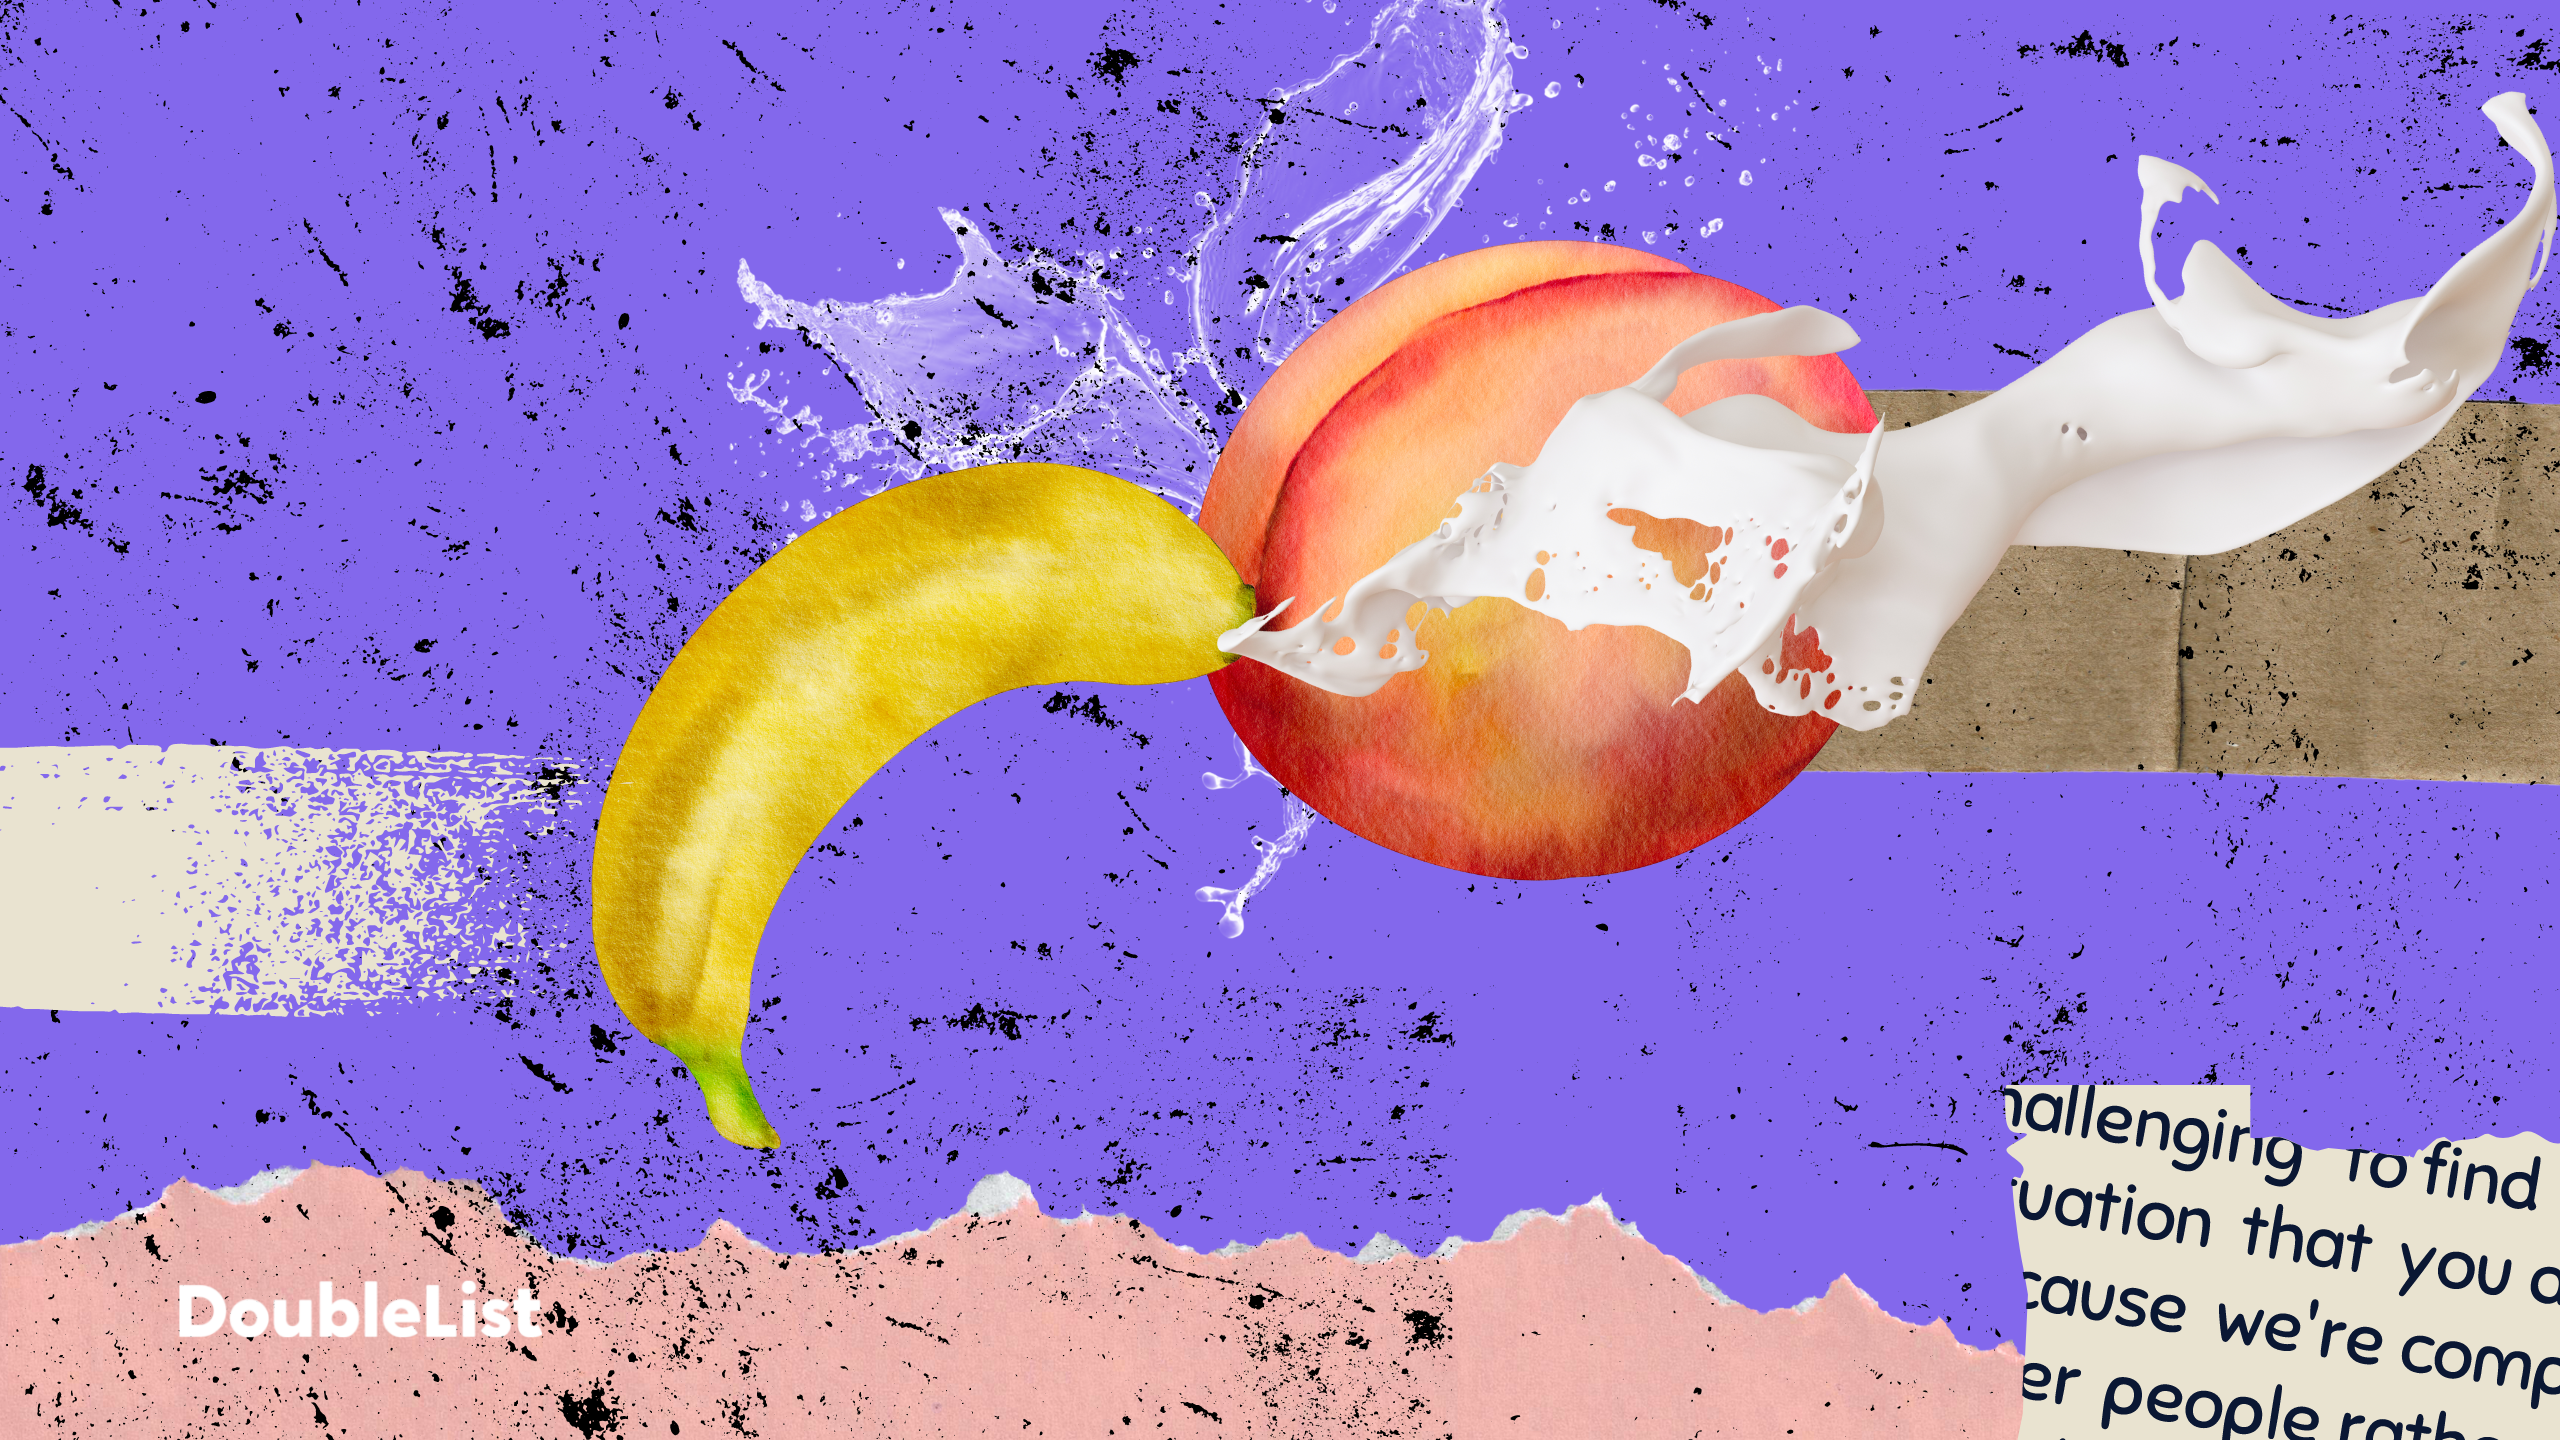 A banana next to a peach representing casual hookups and hookup sites and apps.